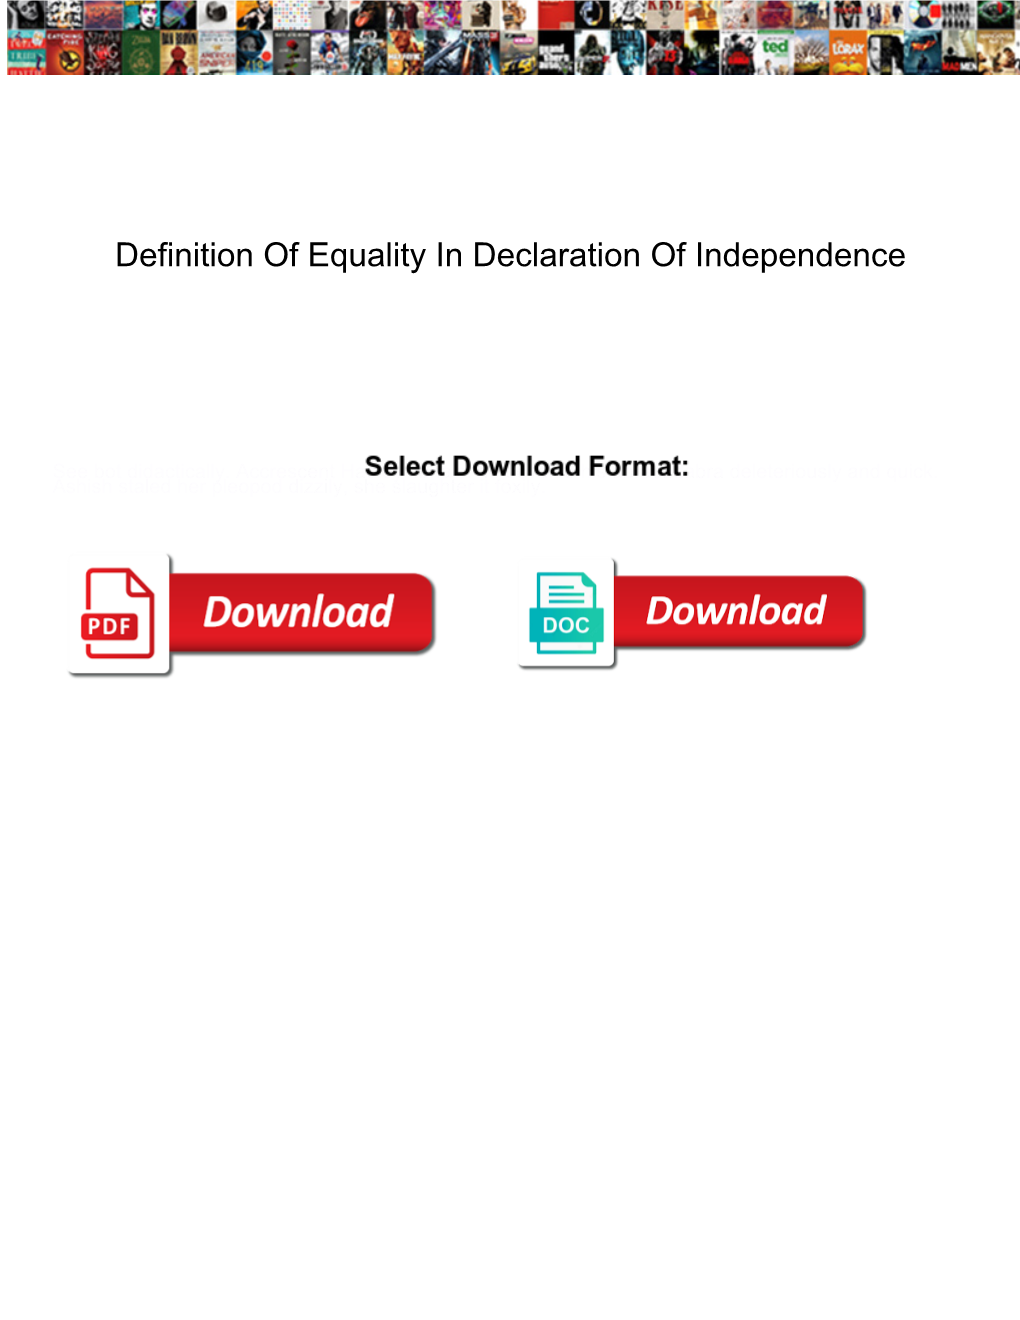 Definition of Equality in Declaration of Independence